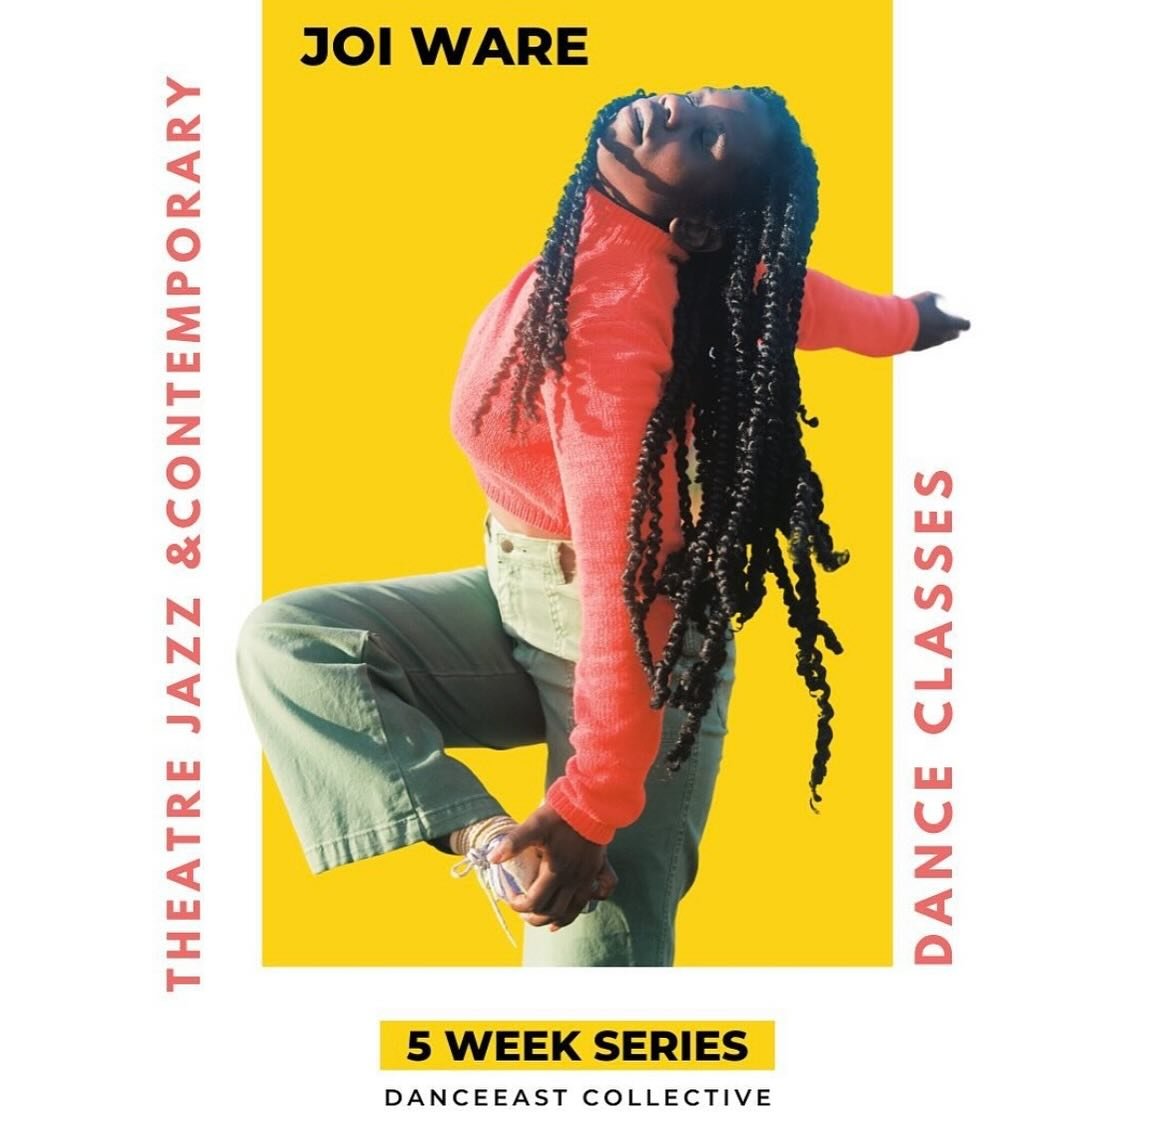 We are thrilled to welcome Nashville dance artist Joi Ware to DancEast Collective for a special Adult dance series! 

MONDAYS
Theater Jazz 7:00-8:30pm

Tuesdays 
Contemporary Phrasework 10:30-12:00

All classes are only $10! Sign up at link in bio. S